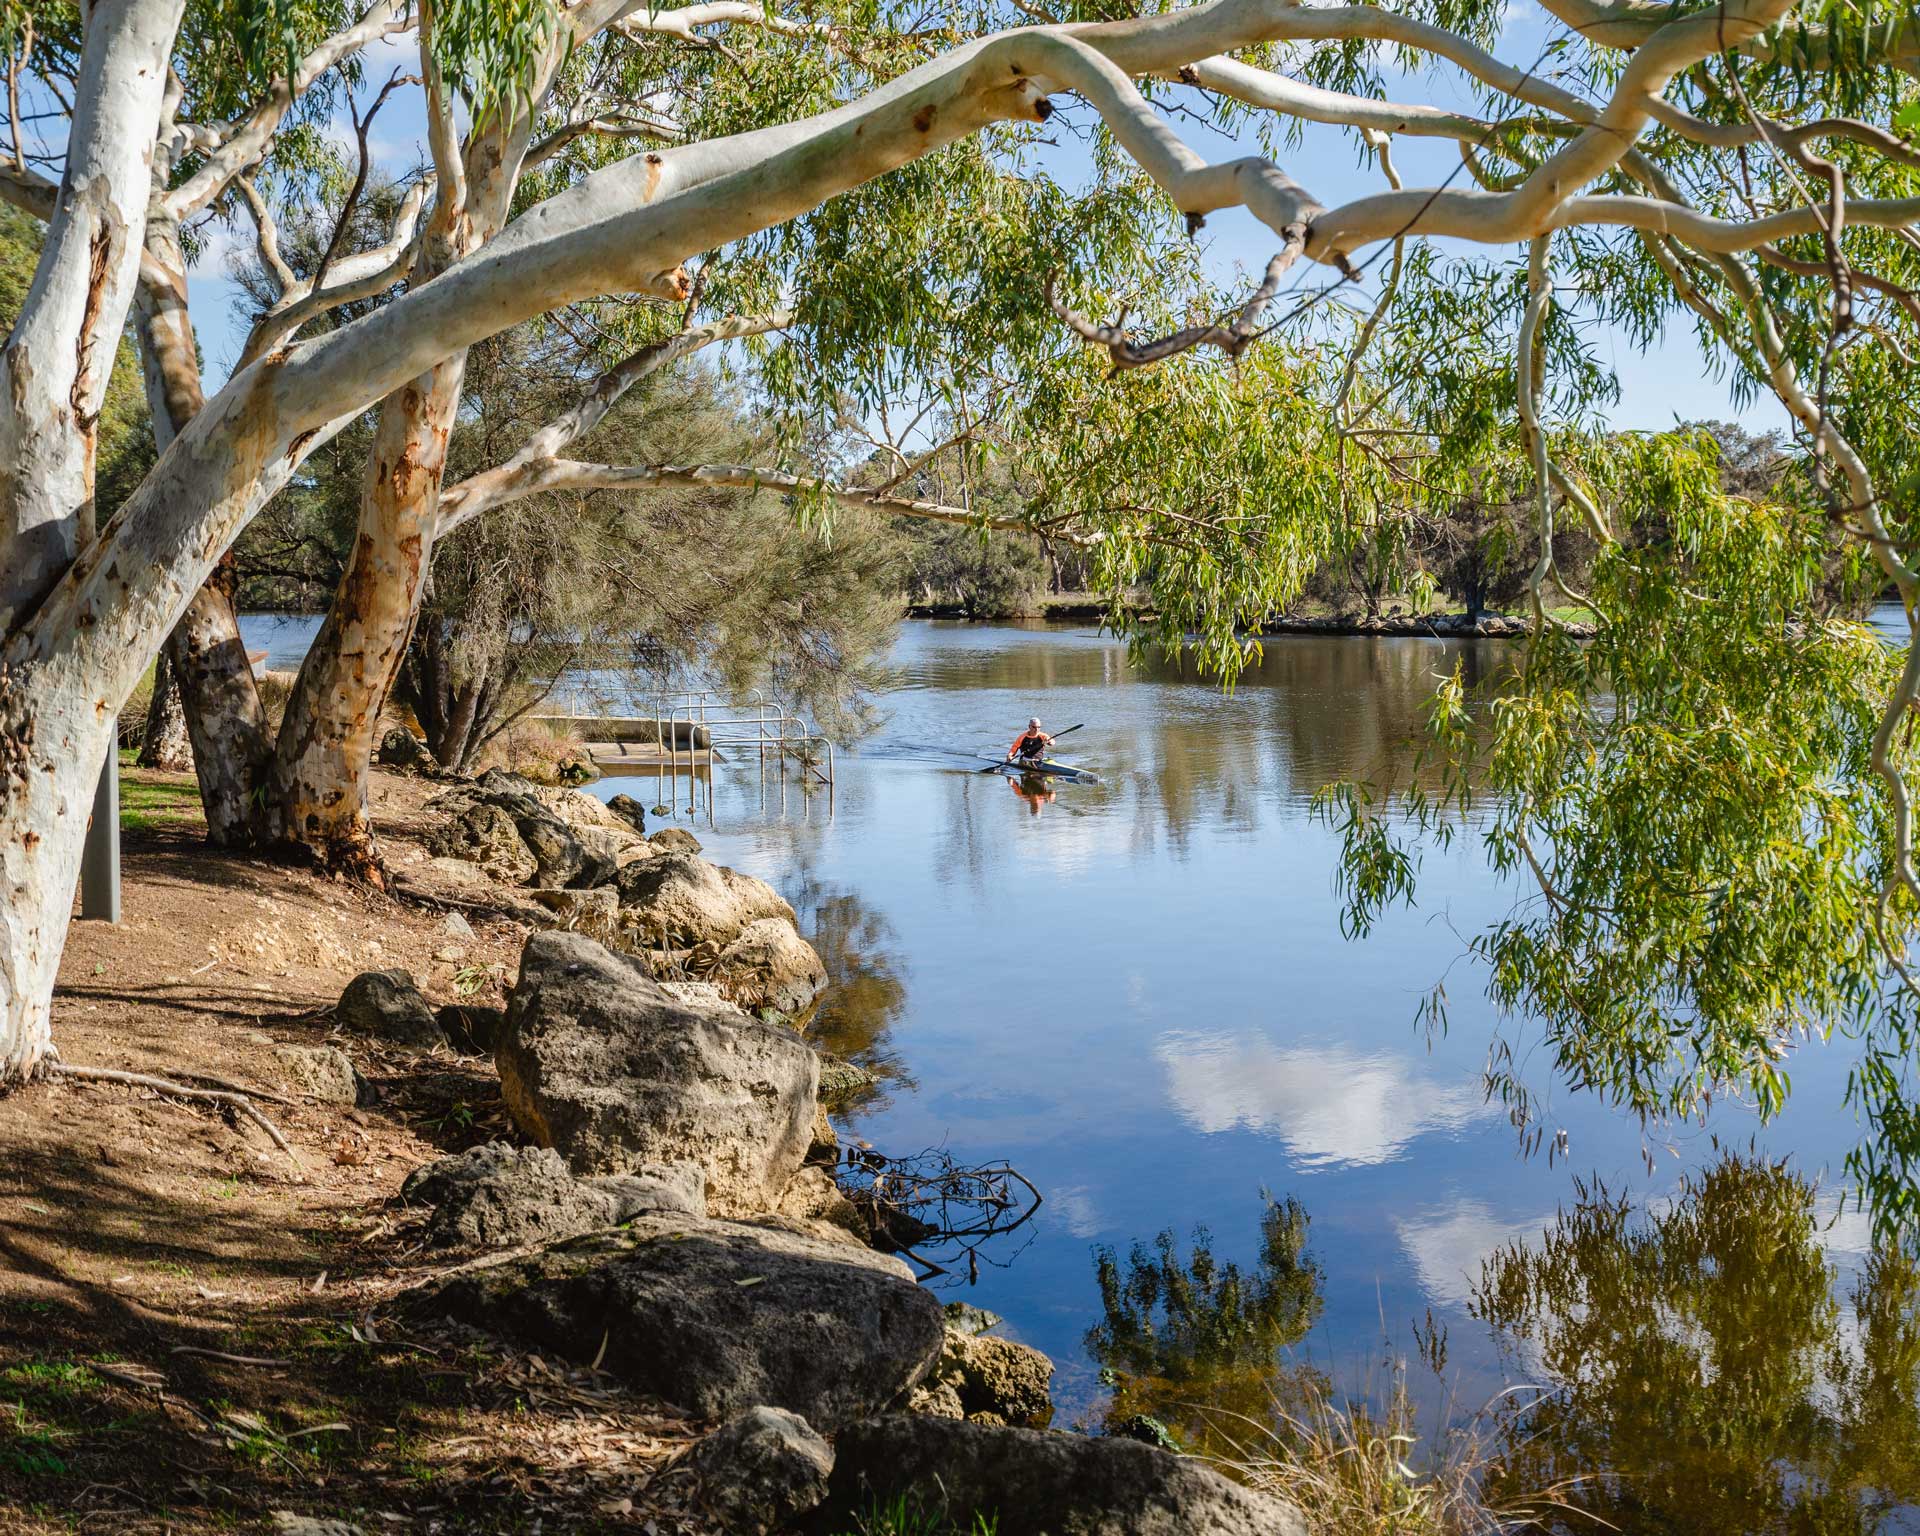 Kayaker on the Swan River by Garvey Park, Ascot.